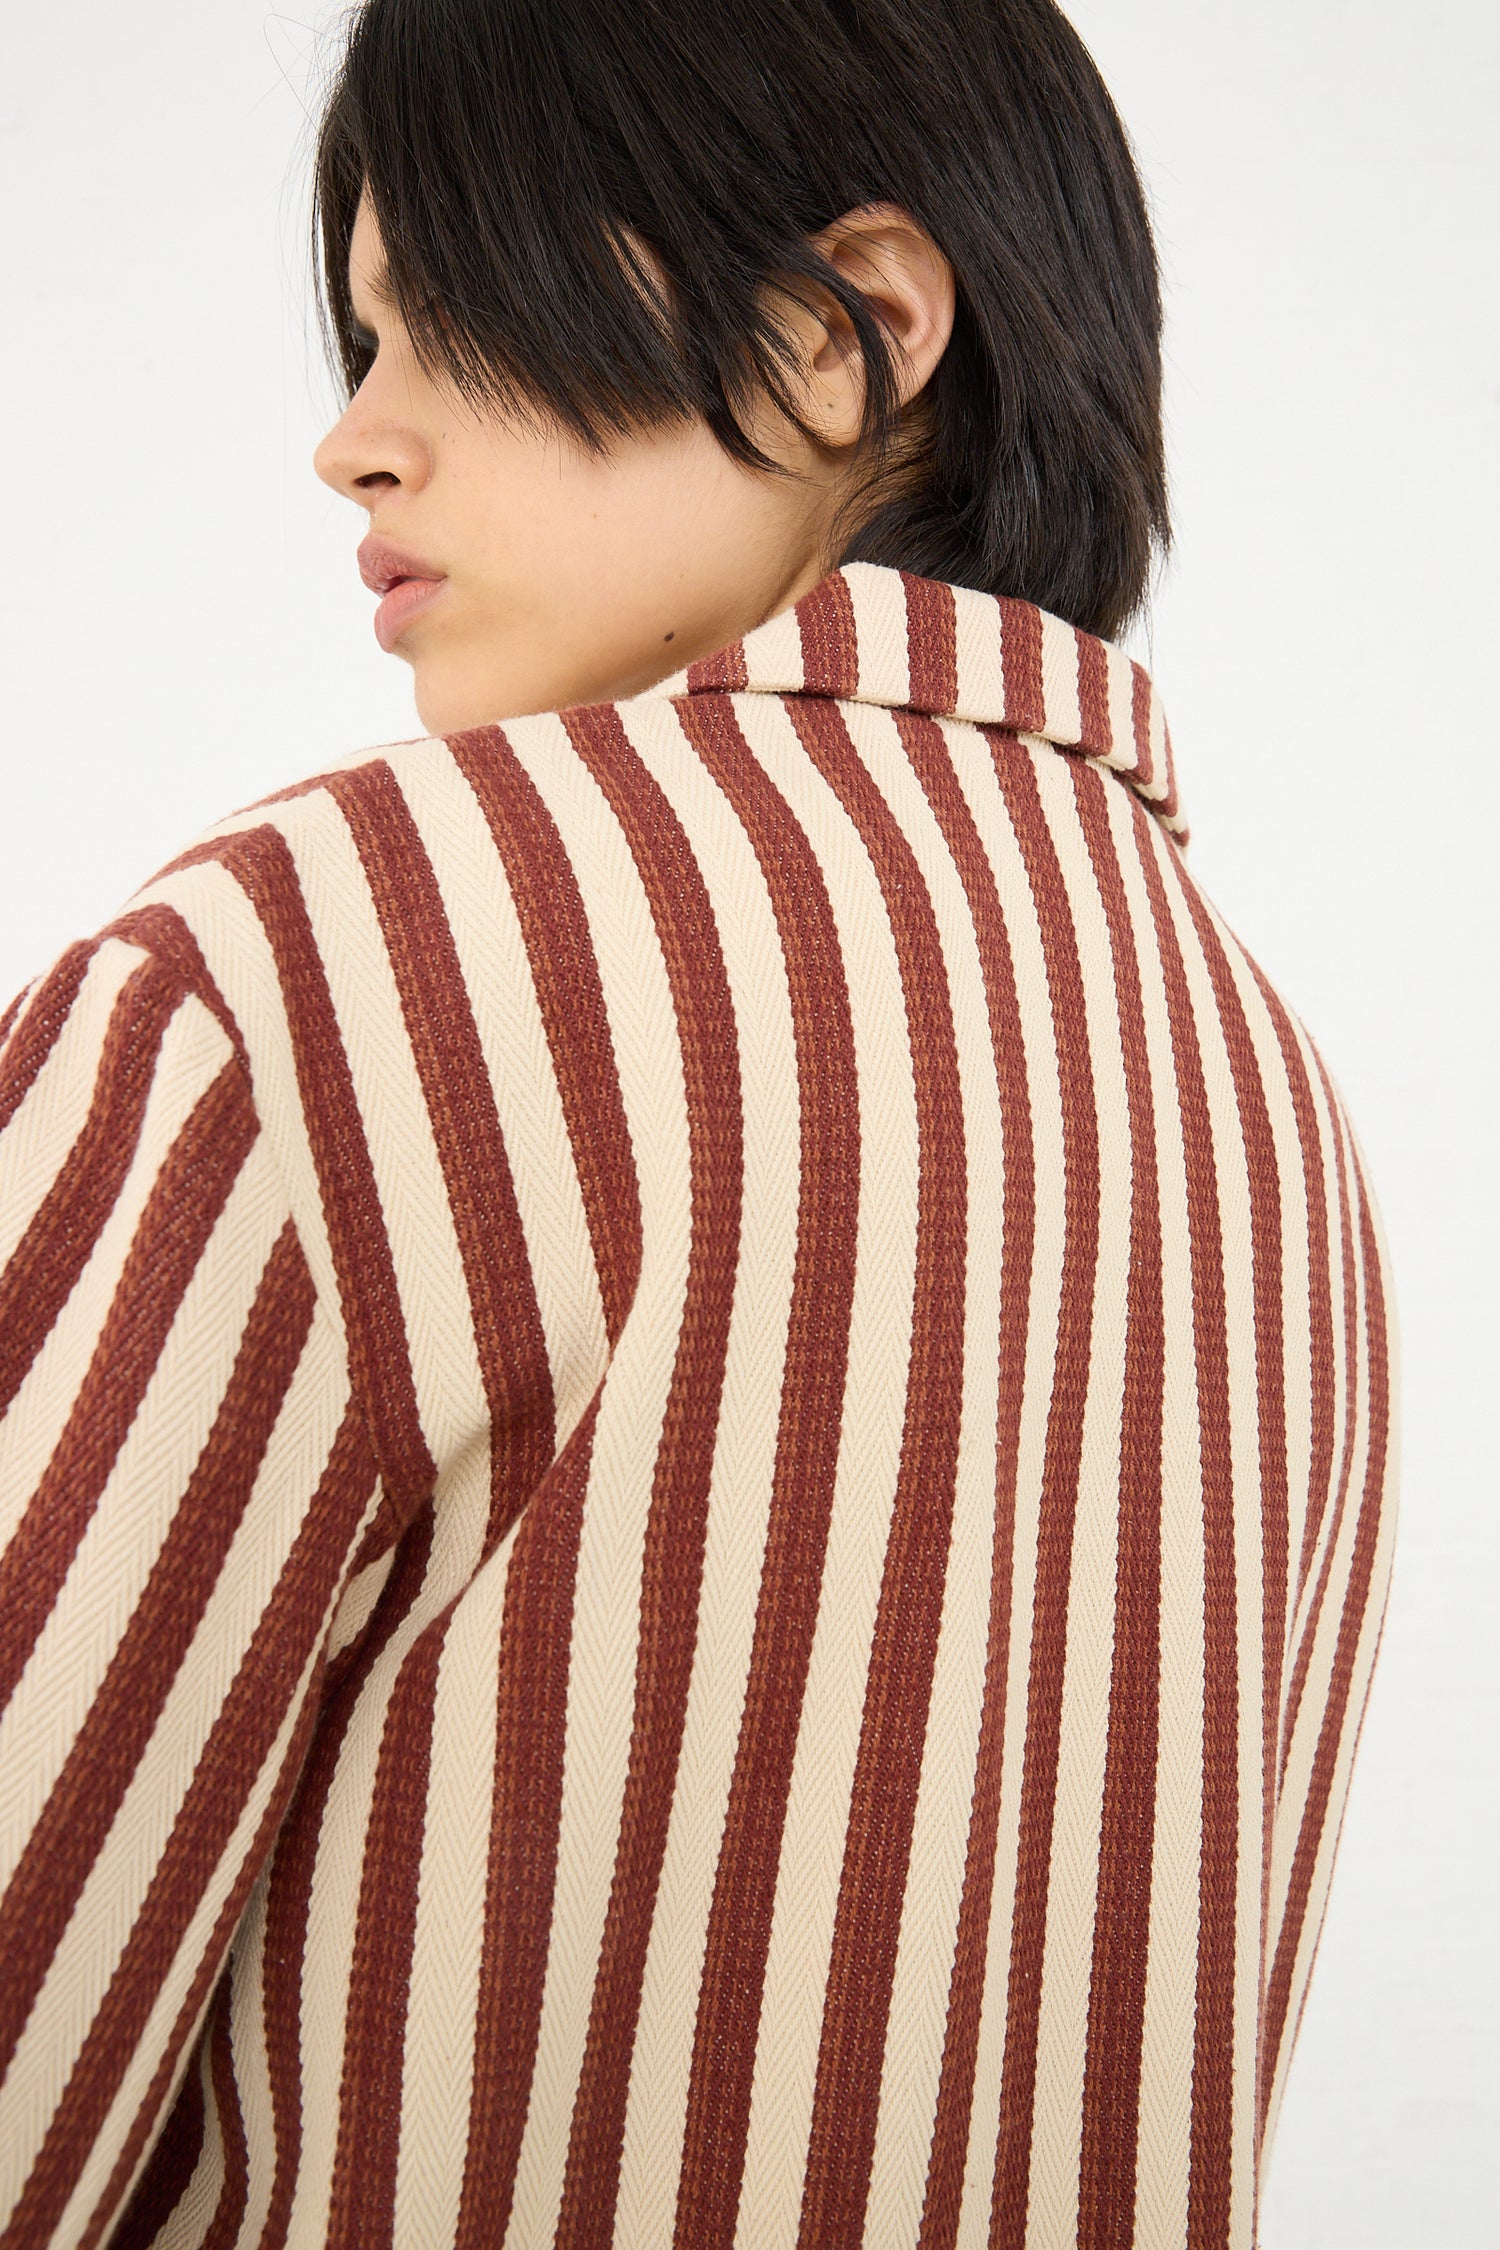 A person with a short hairstyle wearing a Caron Callahan Bernay Jacket in Auburn Stripe, viewed from the back and side.